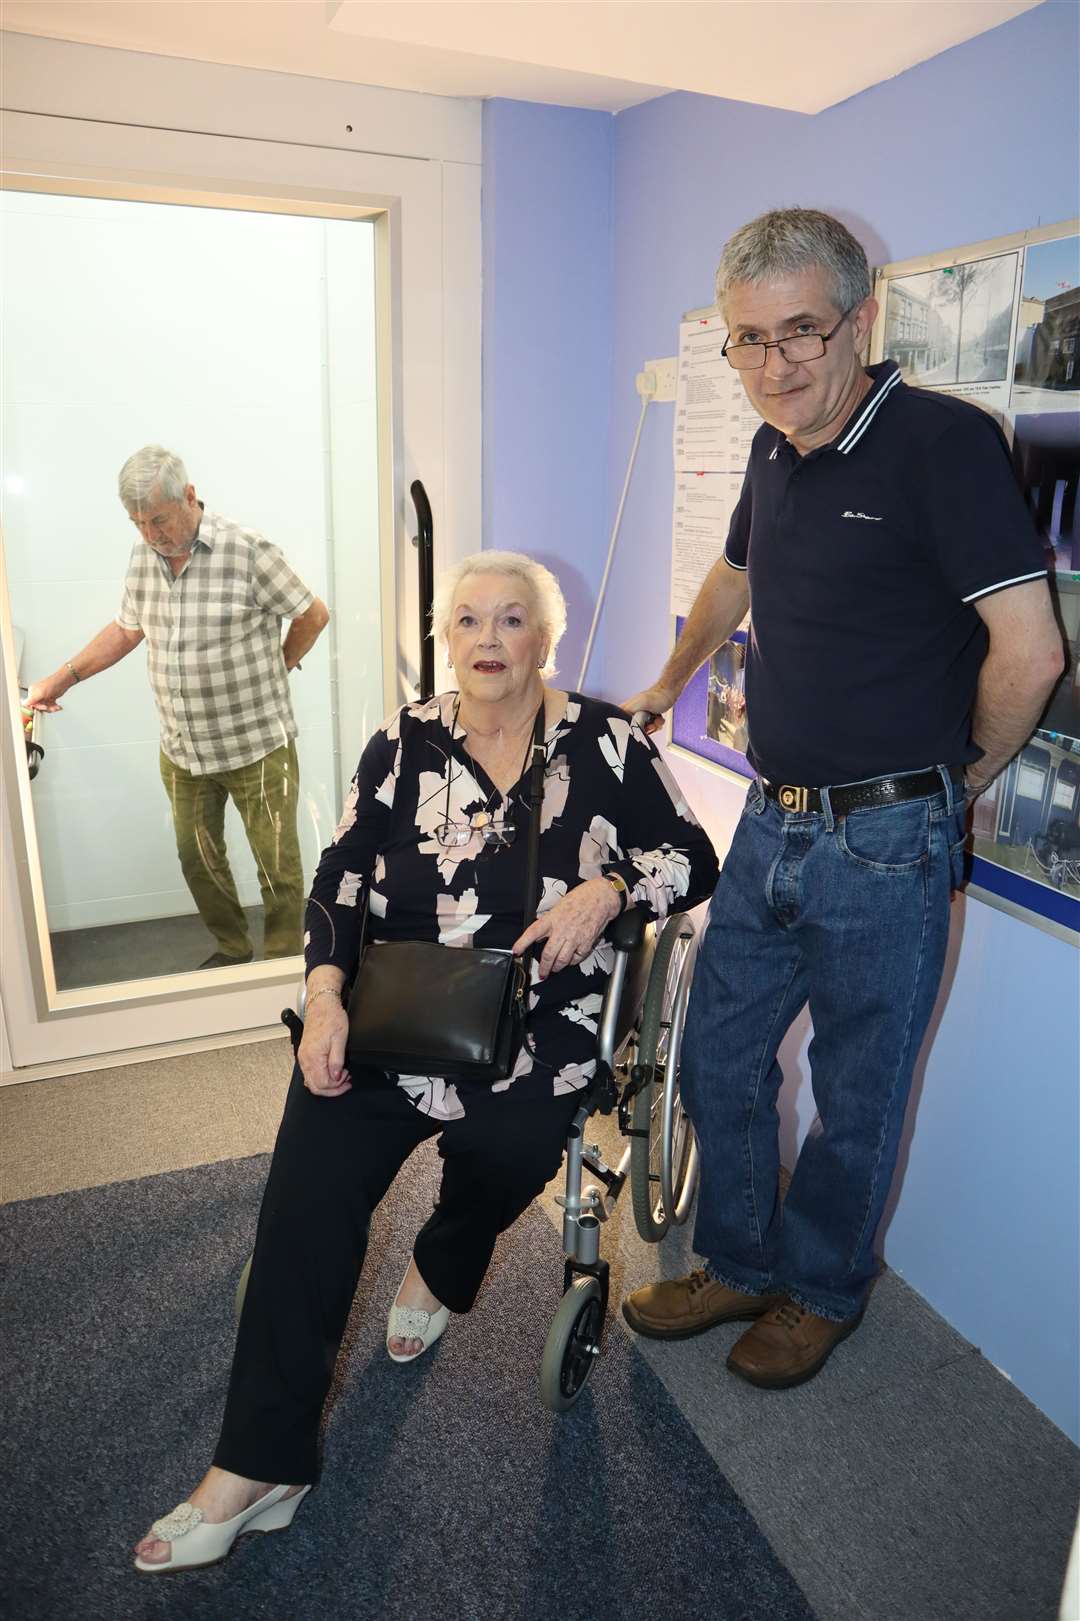 Ann Michalski, former chairman of the Sittingbourne Disabled Club, was able to visit upstairs at the Criterion Theatre, Blue Town, for the first time thanks to its new lift. She is pictured with helper Tim Pyne. Derek Griffiths was in the lift.